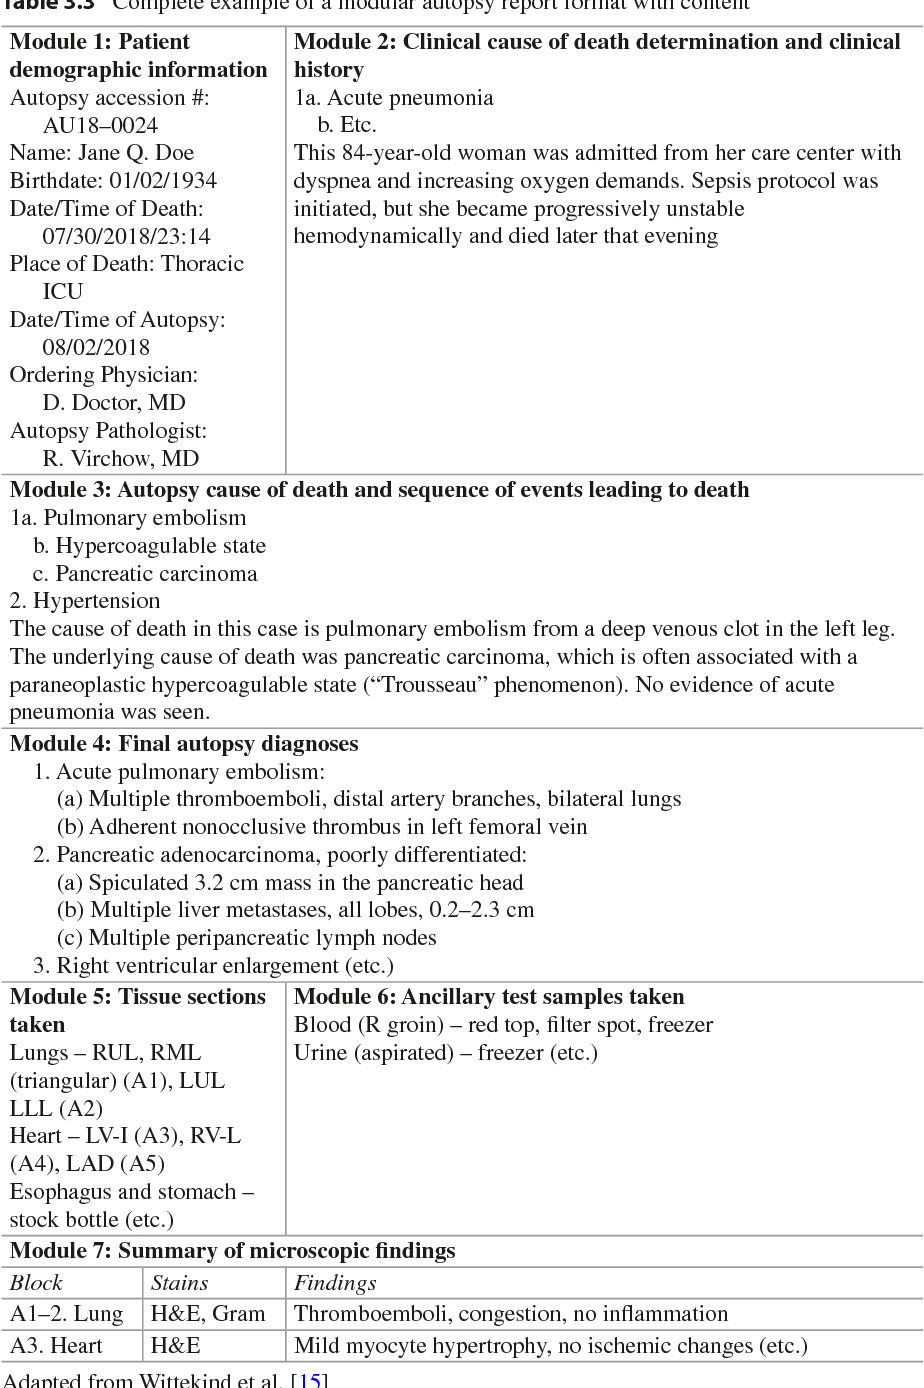 Table 3.3 From Autopsy In The 21St Century | Semantic Scholar With Autopsy Report Template